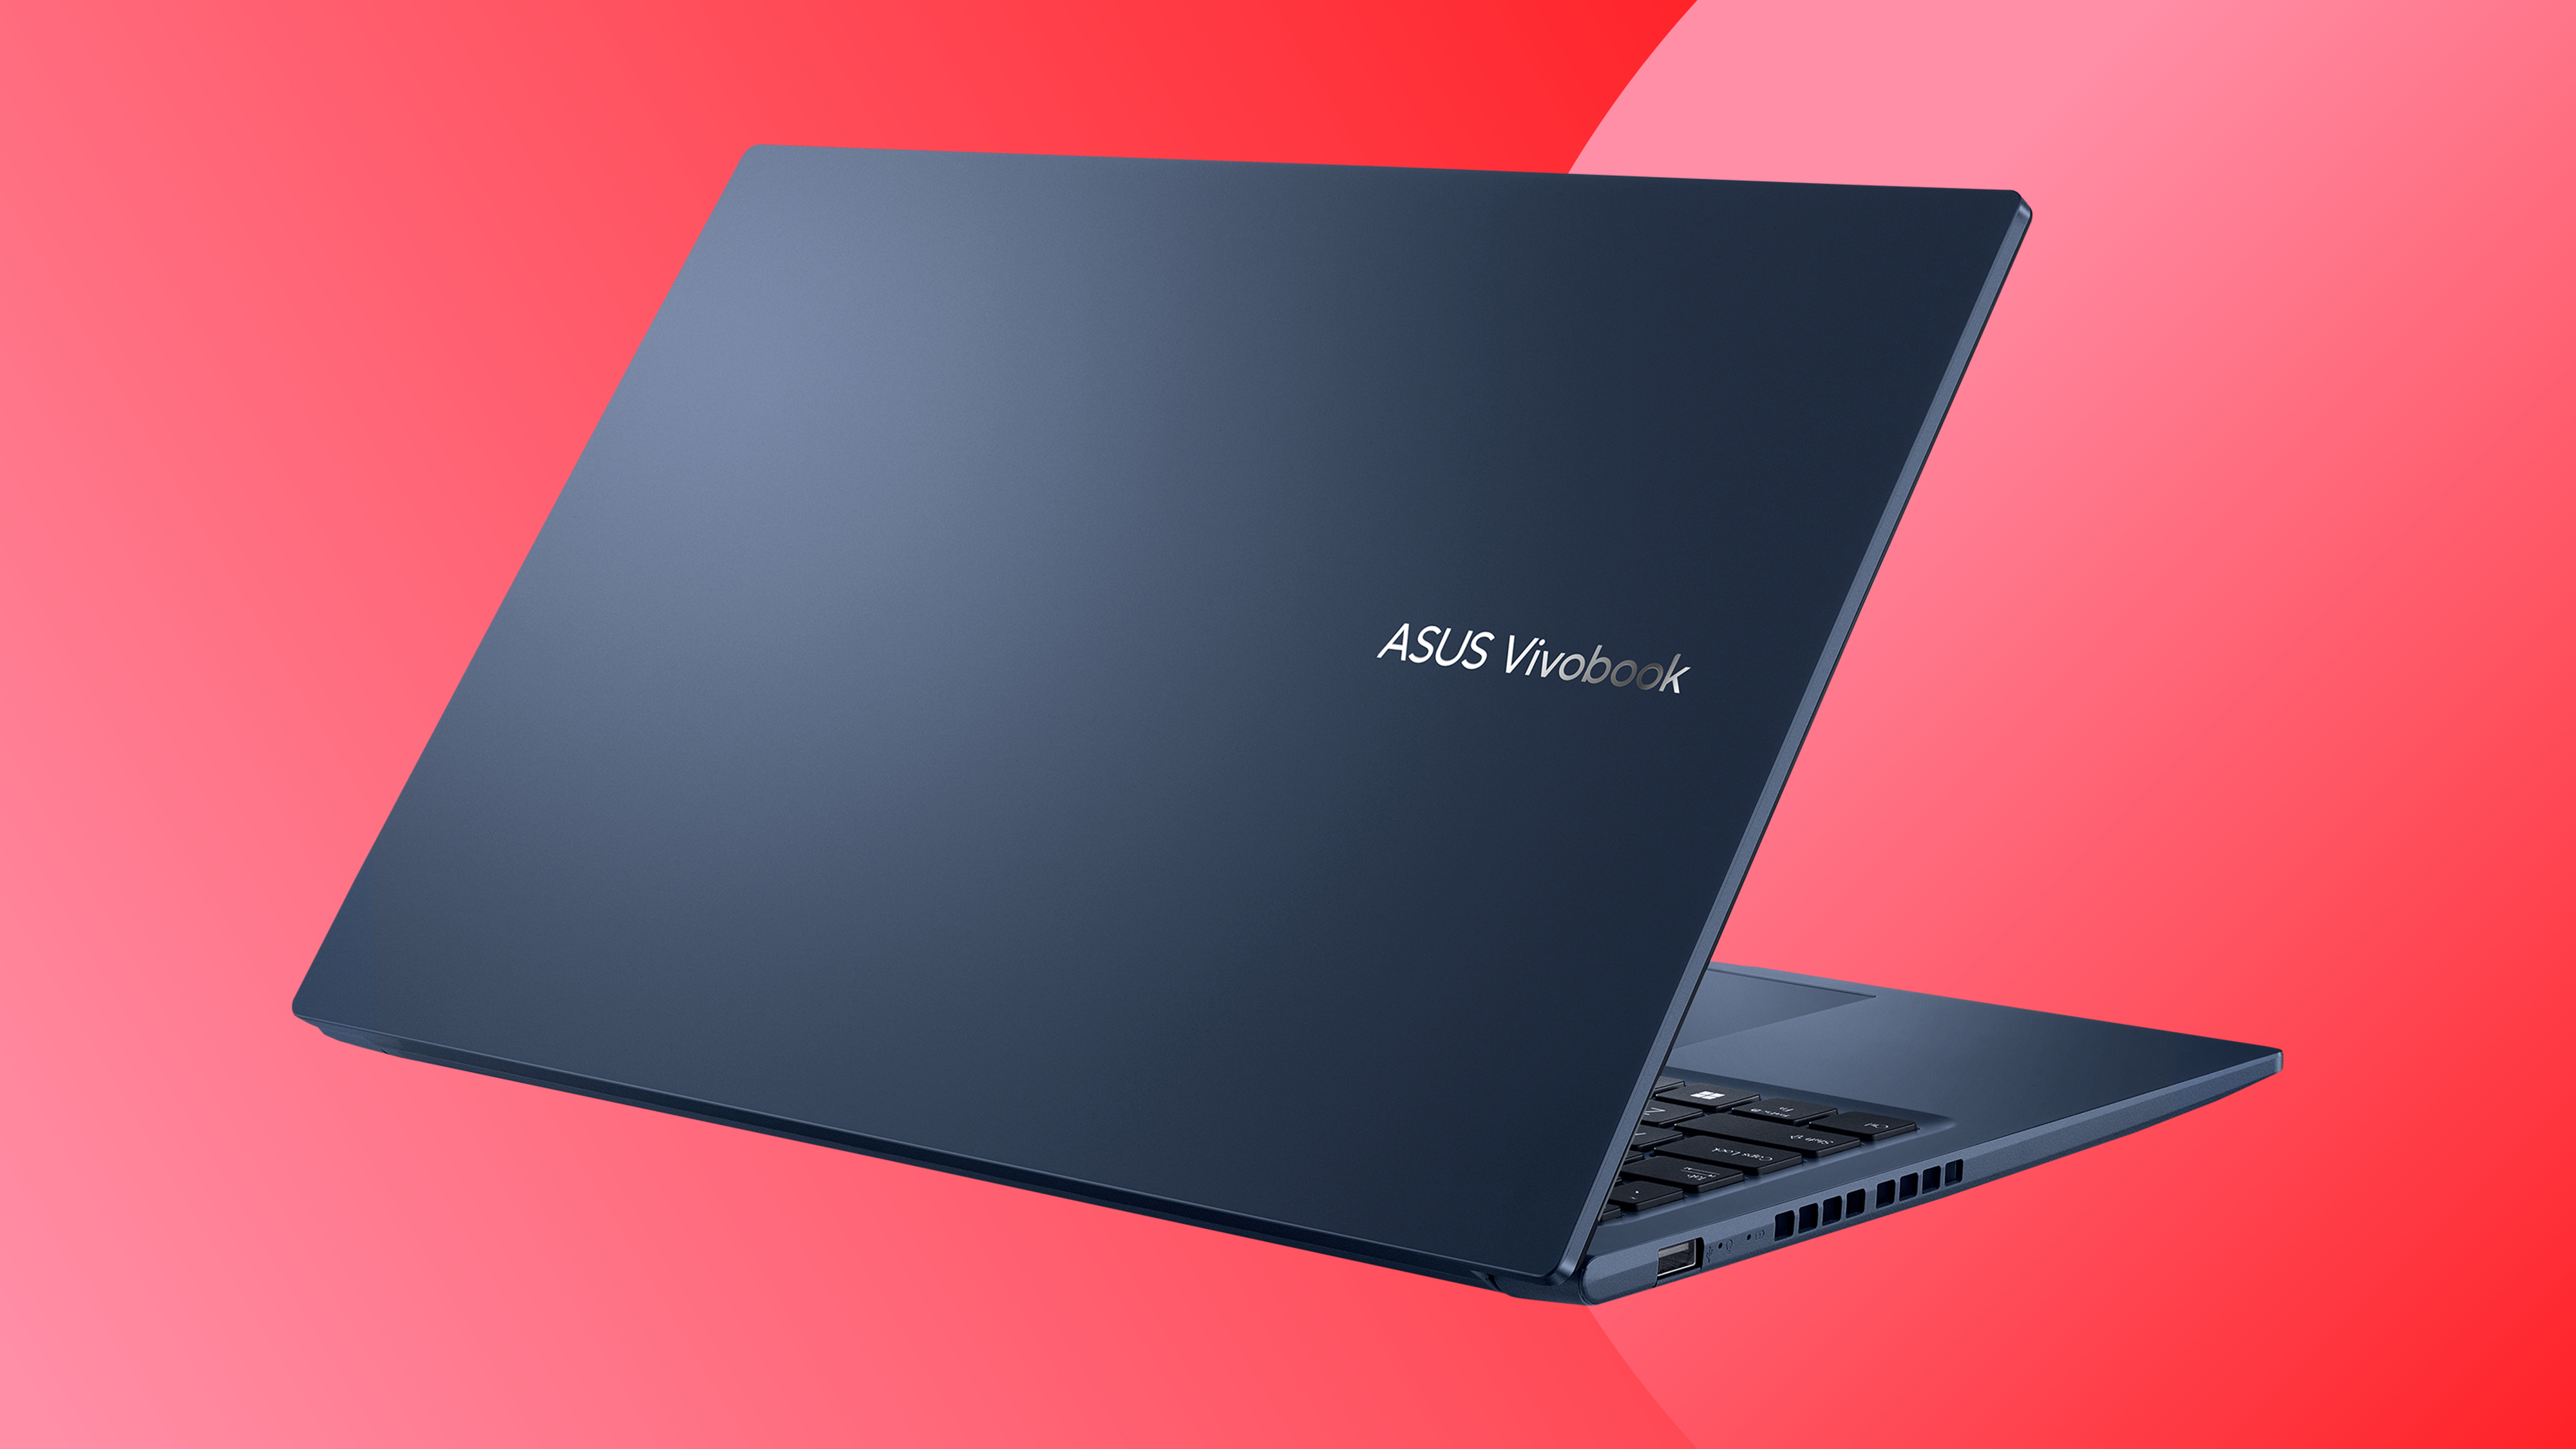 An ASUS Black Friday presents image with an ASUS Vivobook 15 on a red background